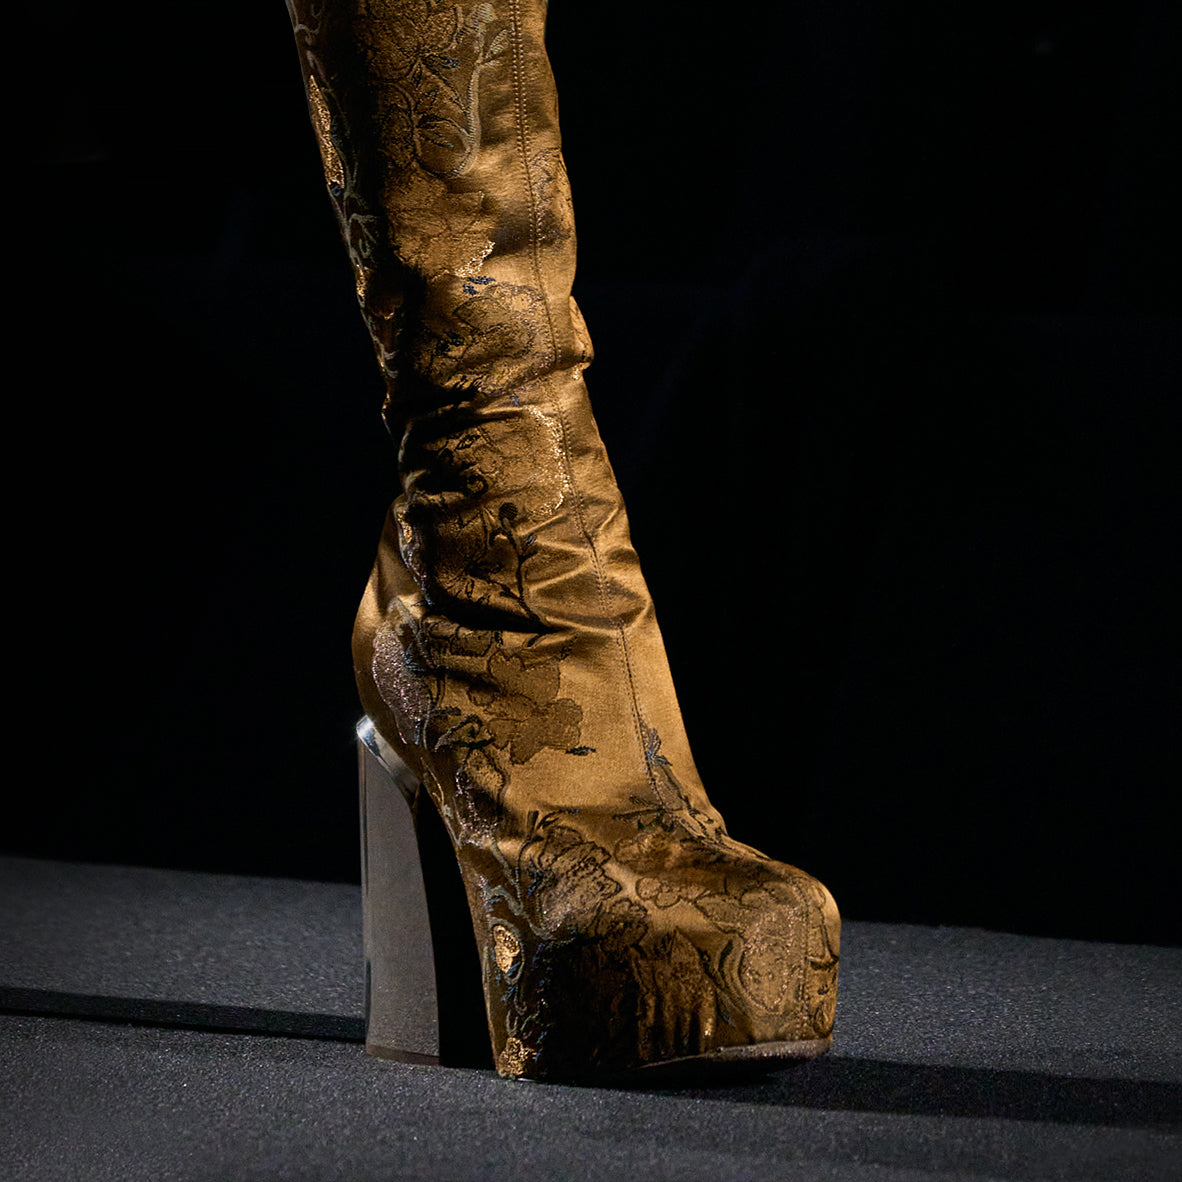 chanel gold boots